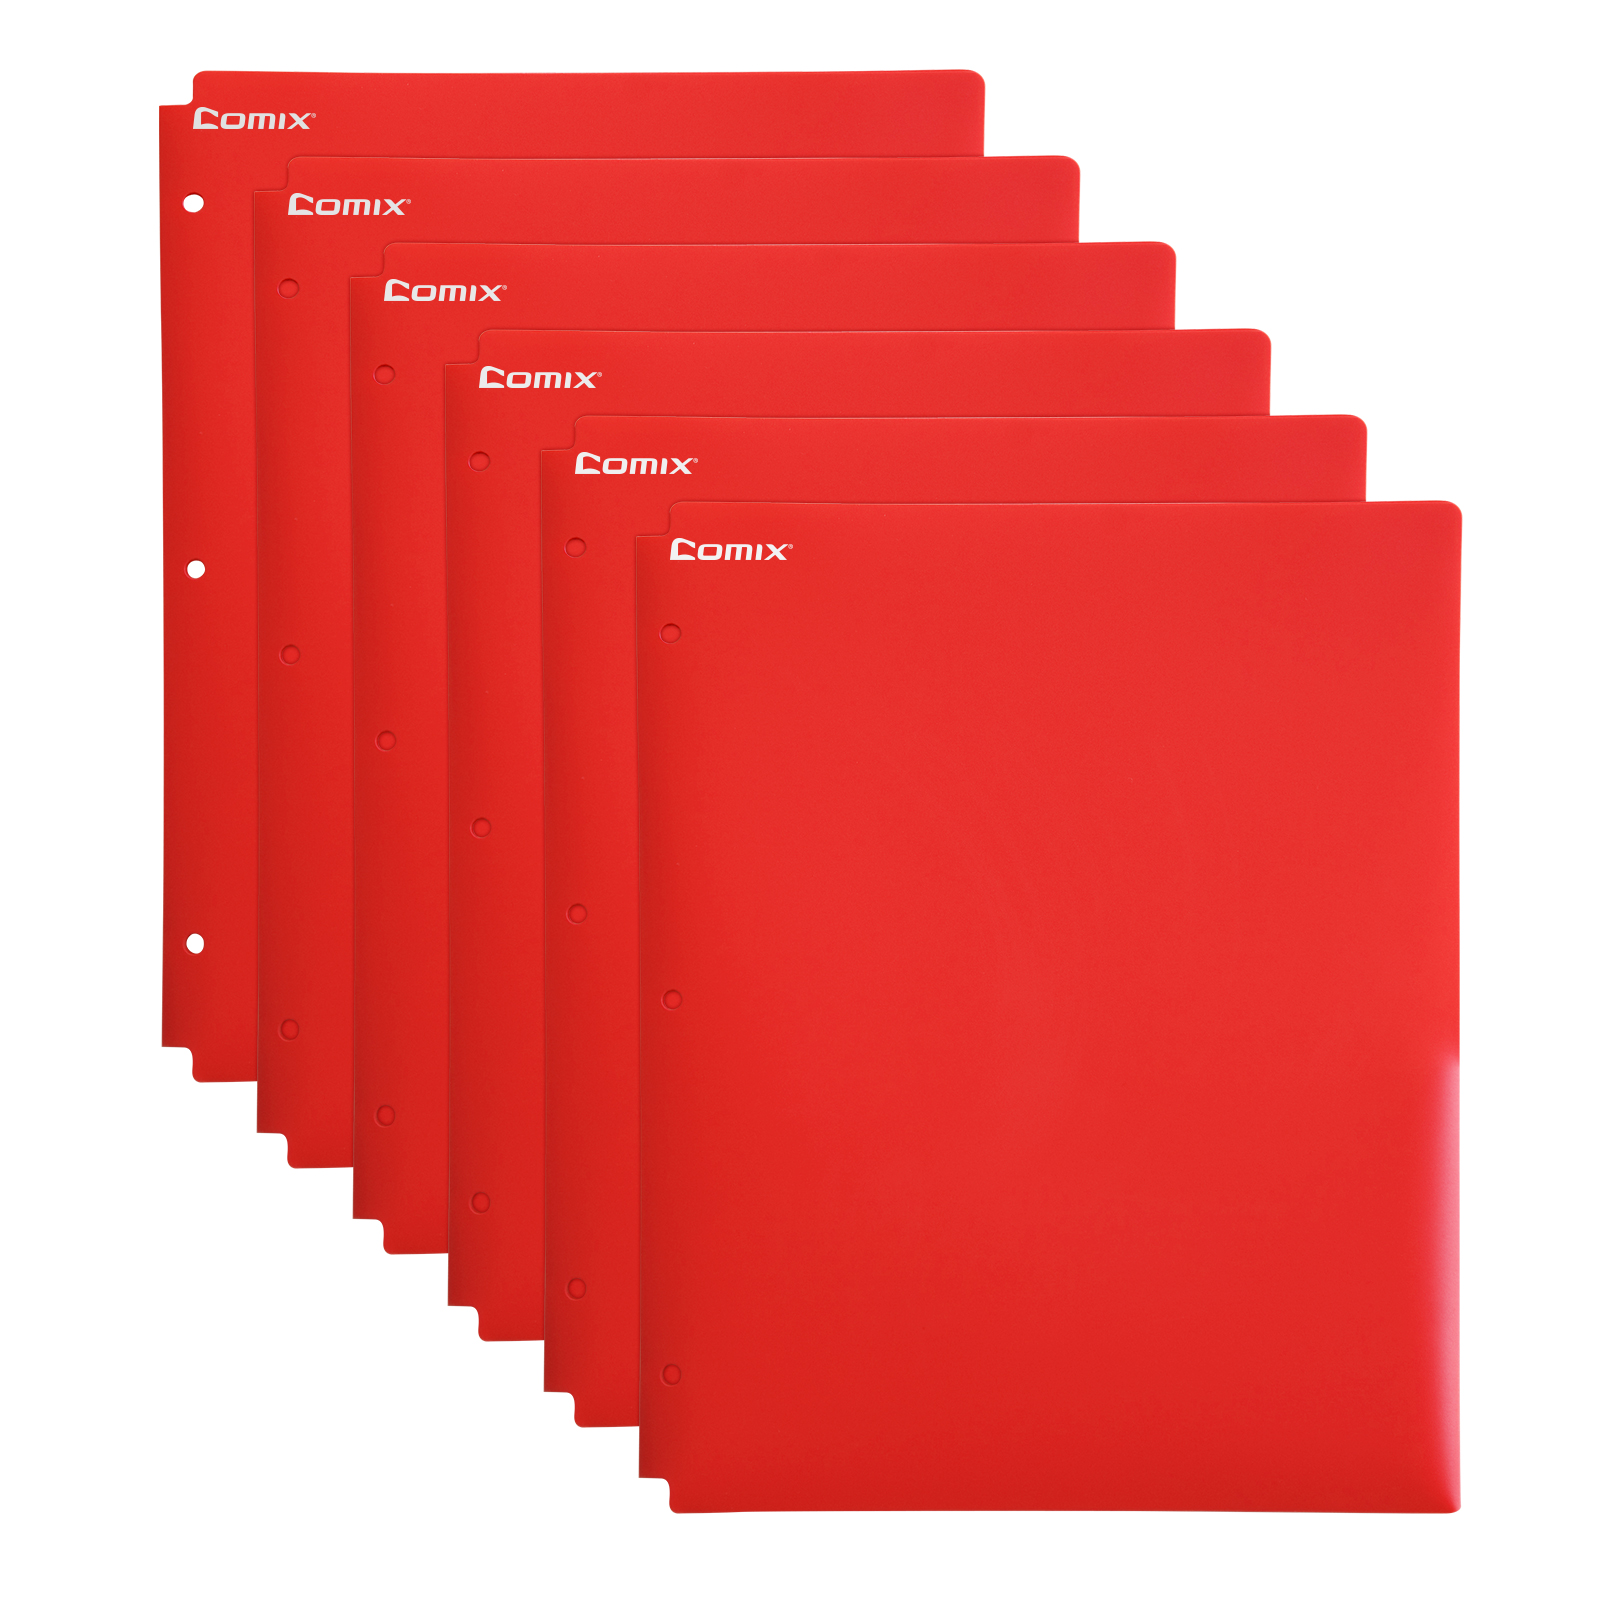 Comix Plastic Folders with 2 Pocket and 3 Holes, Binder Folders with Pockets Hold Letter Size Paper for School and Office,12 Pack (A2140Red)